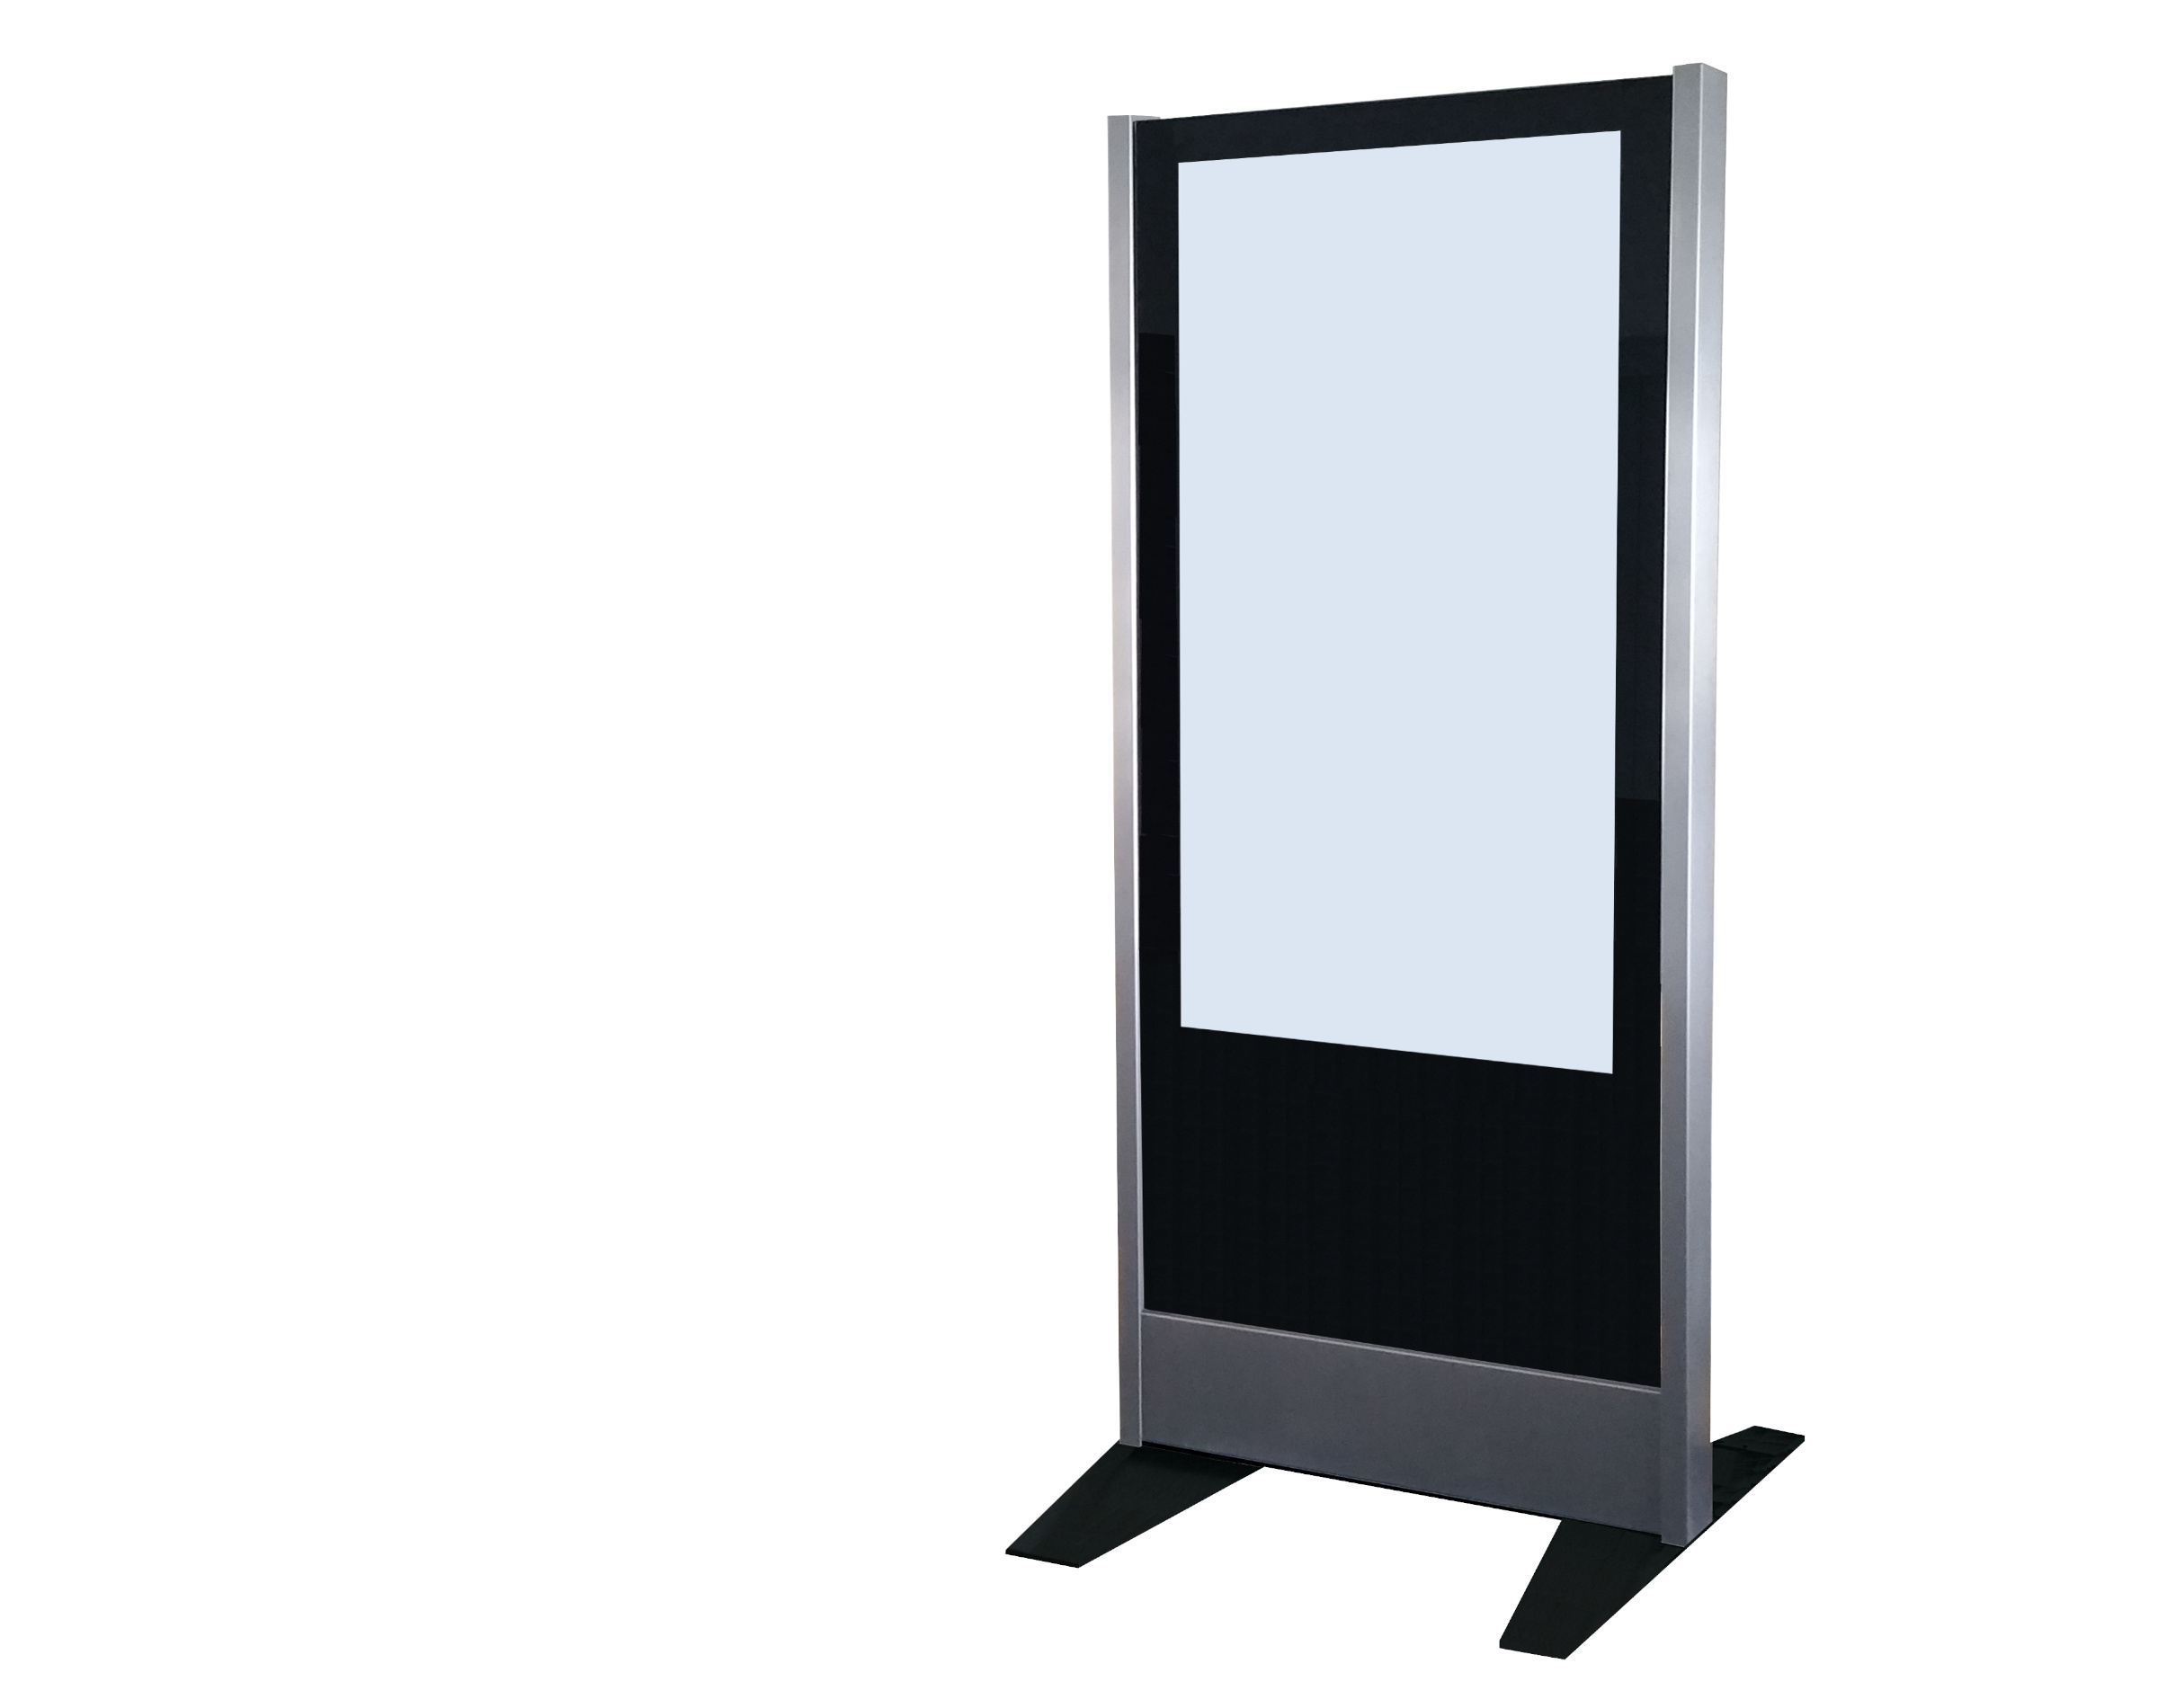 Displays with glass cover